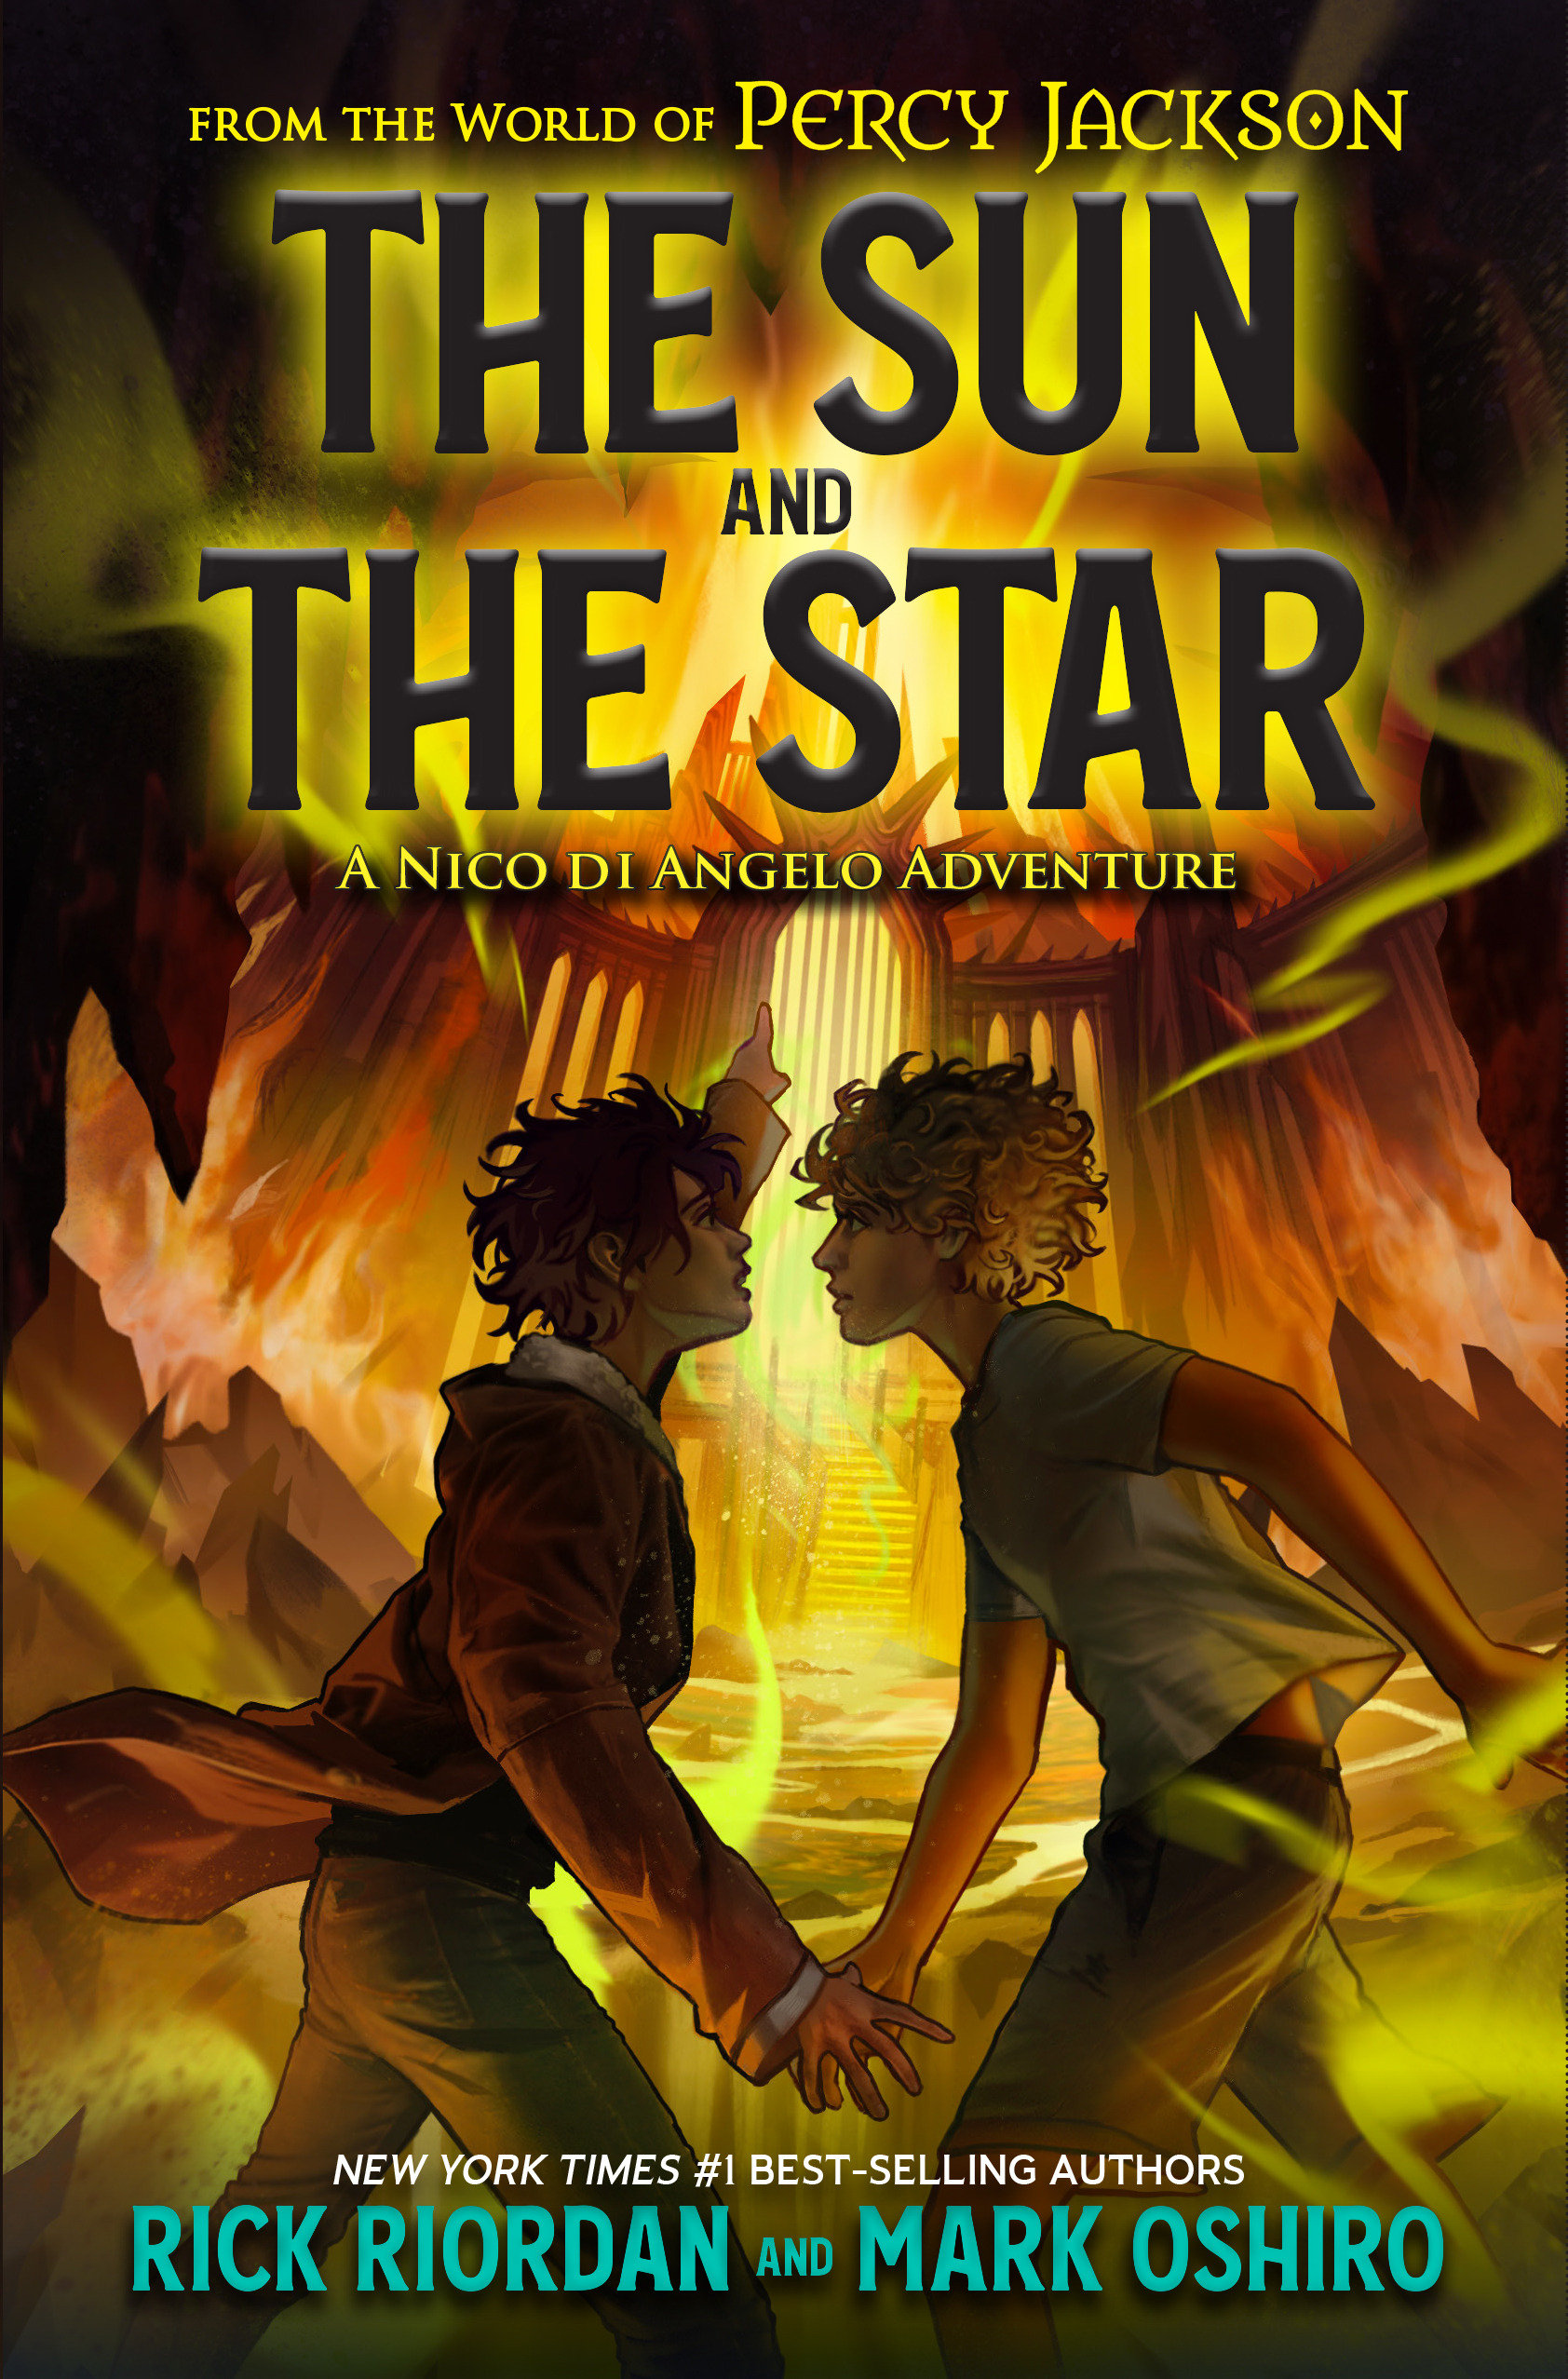 From The World of Percy Jackson The Sun and the Star Hardcover Novel